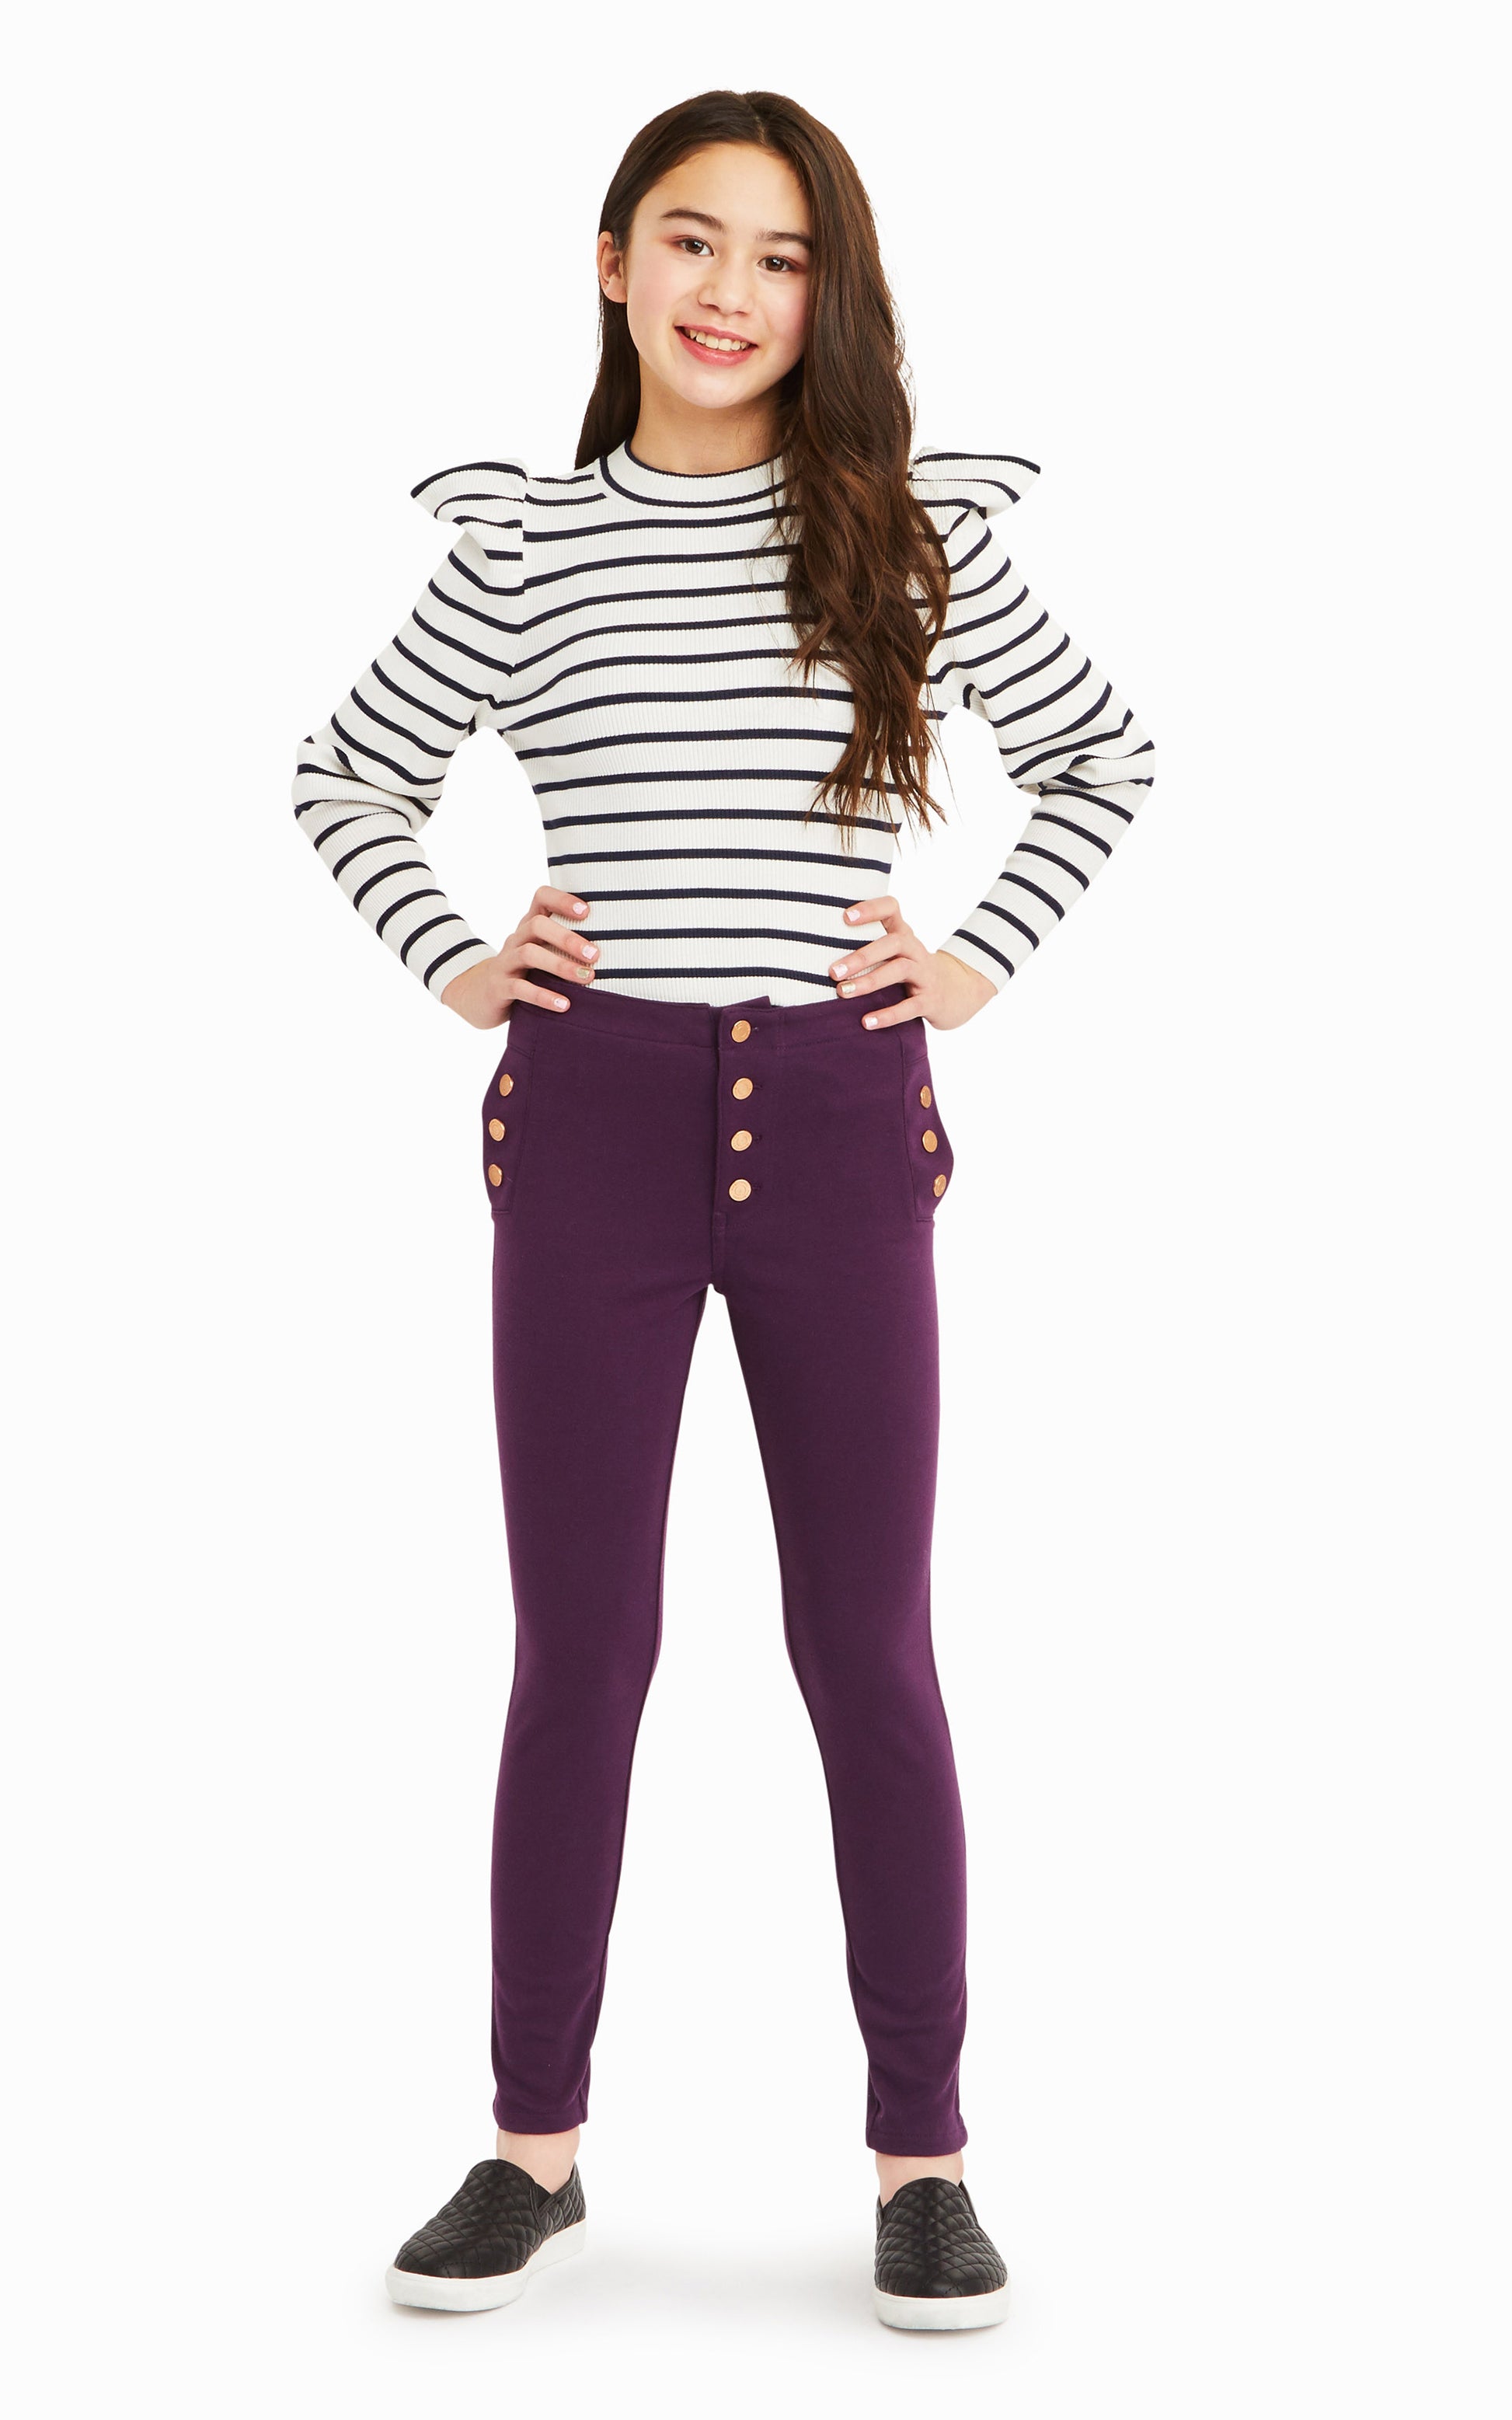 Girl wearing white and black-striped long-sleeve top with purple snap-front pants.